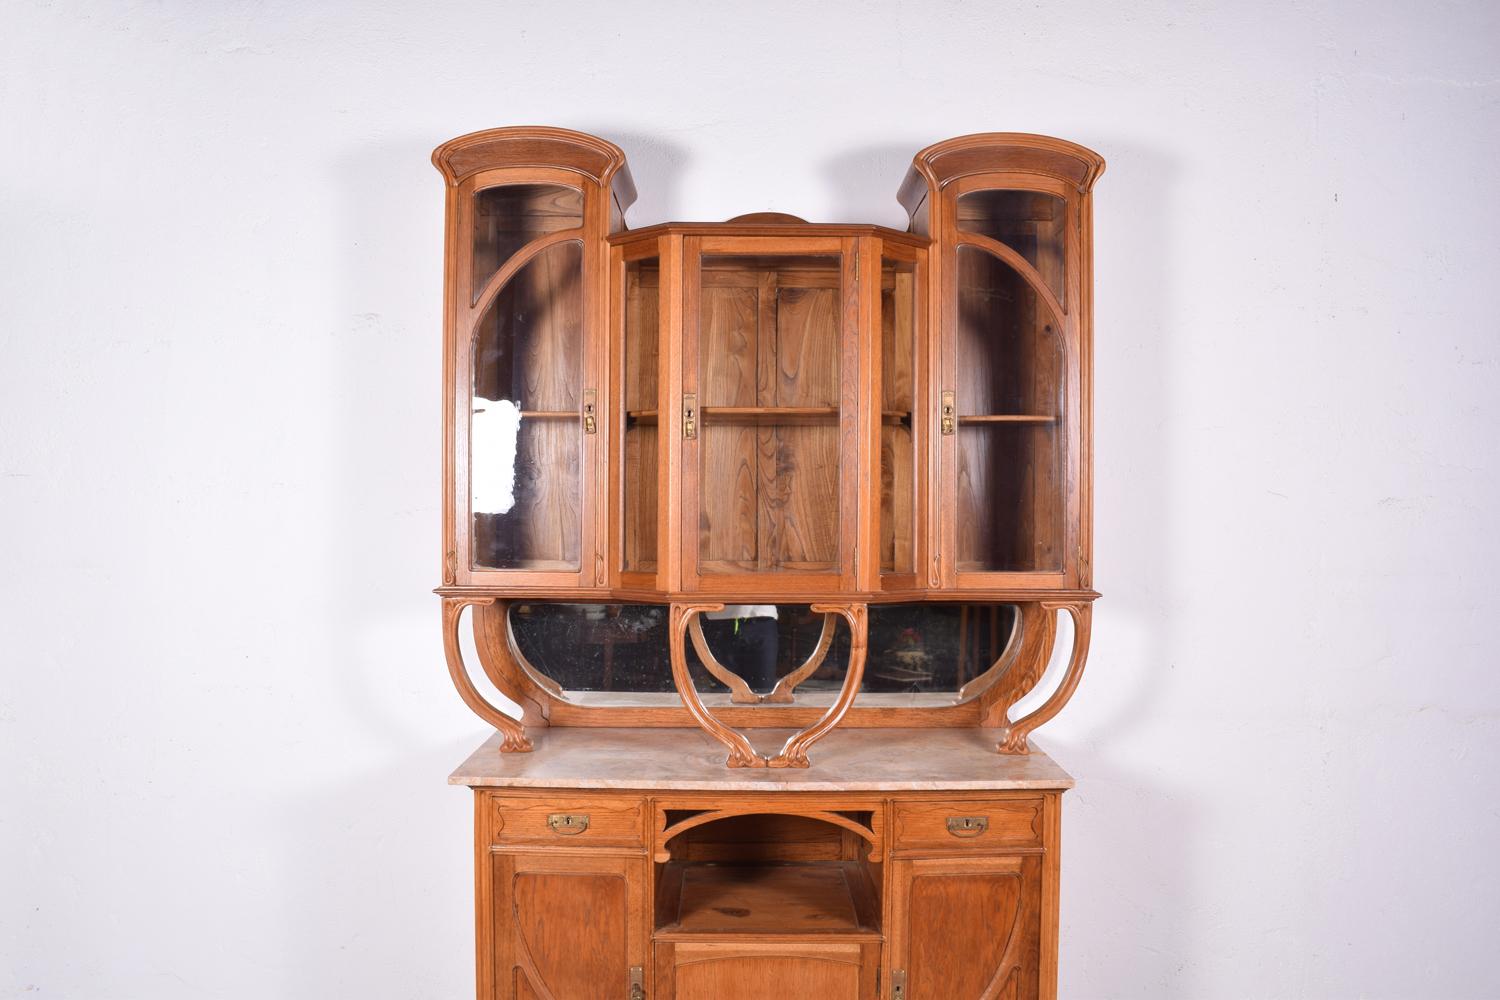 Oak cabinet, similar model in Gustave Serrurier-Bovy. On the front upper part has three glass doors with the original and antique glass, and in the lower part has three doors, two drawers and an open space. The handles and hinges are in hammered